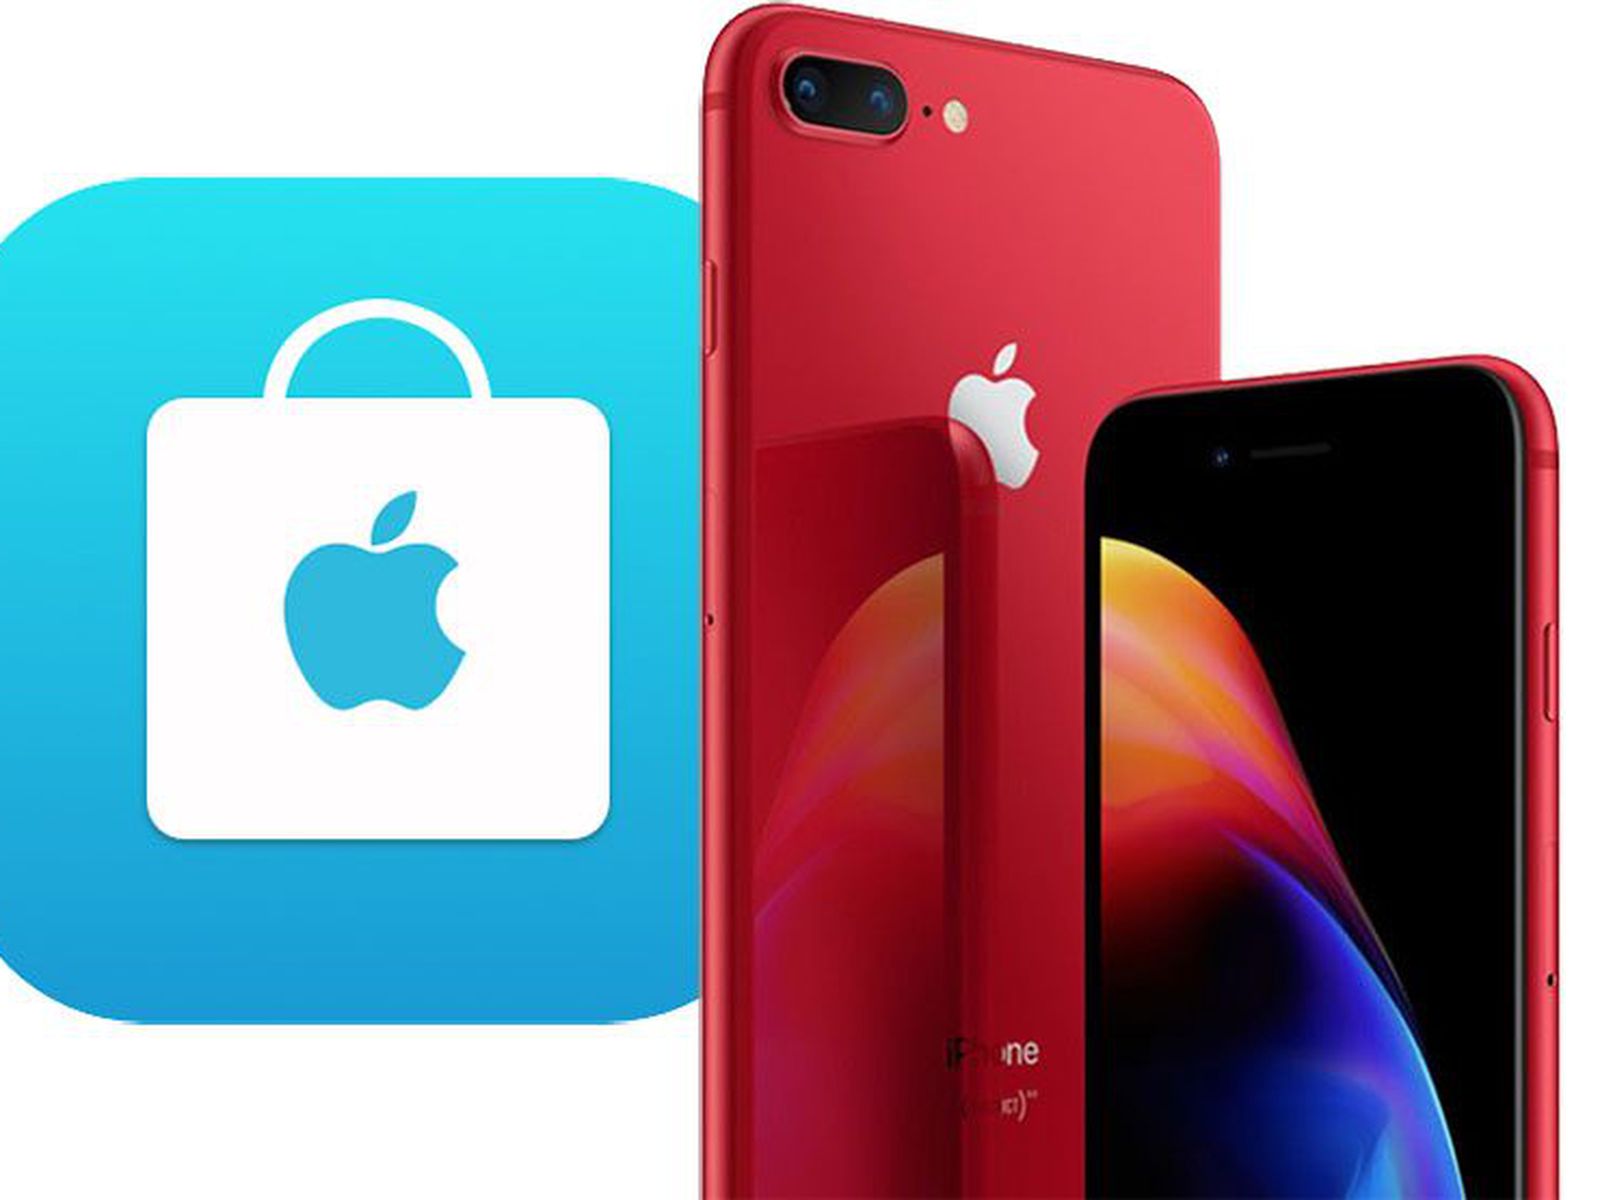 PRODUCT)RED iPhone 8 and iPhone 8 Plus Now Available to